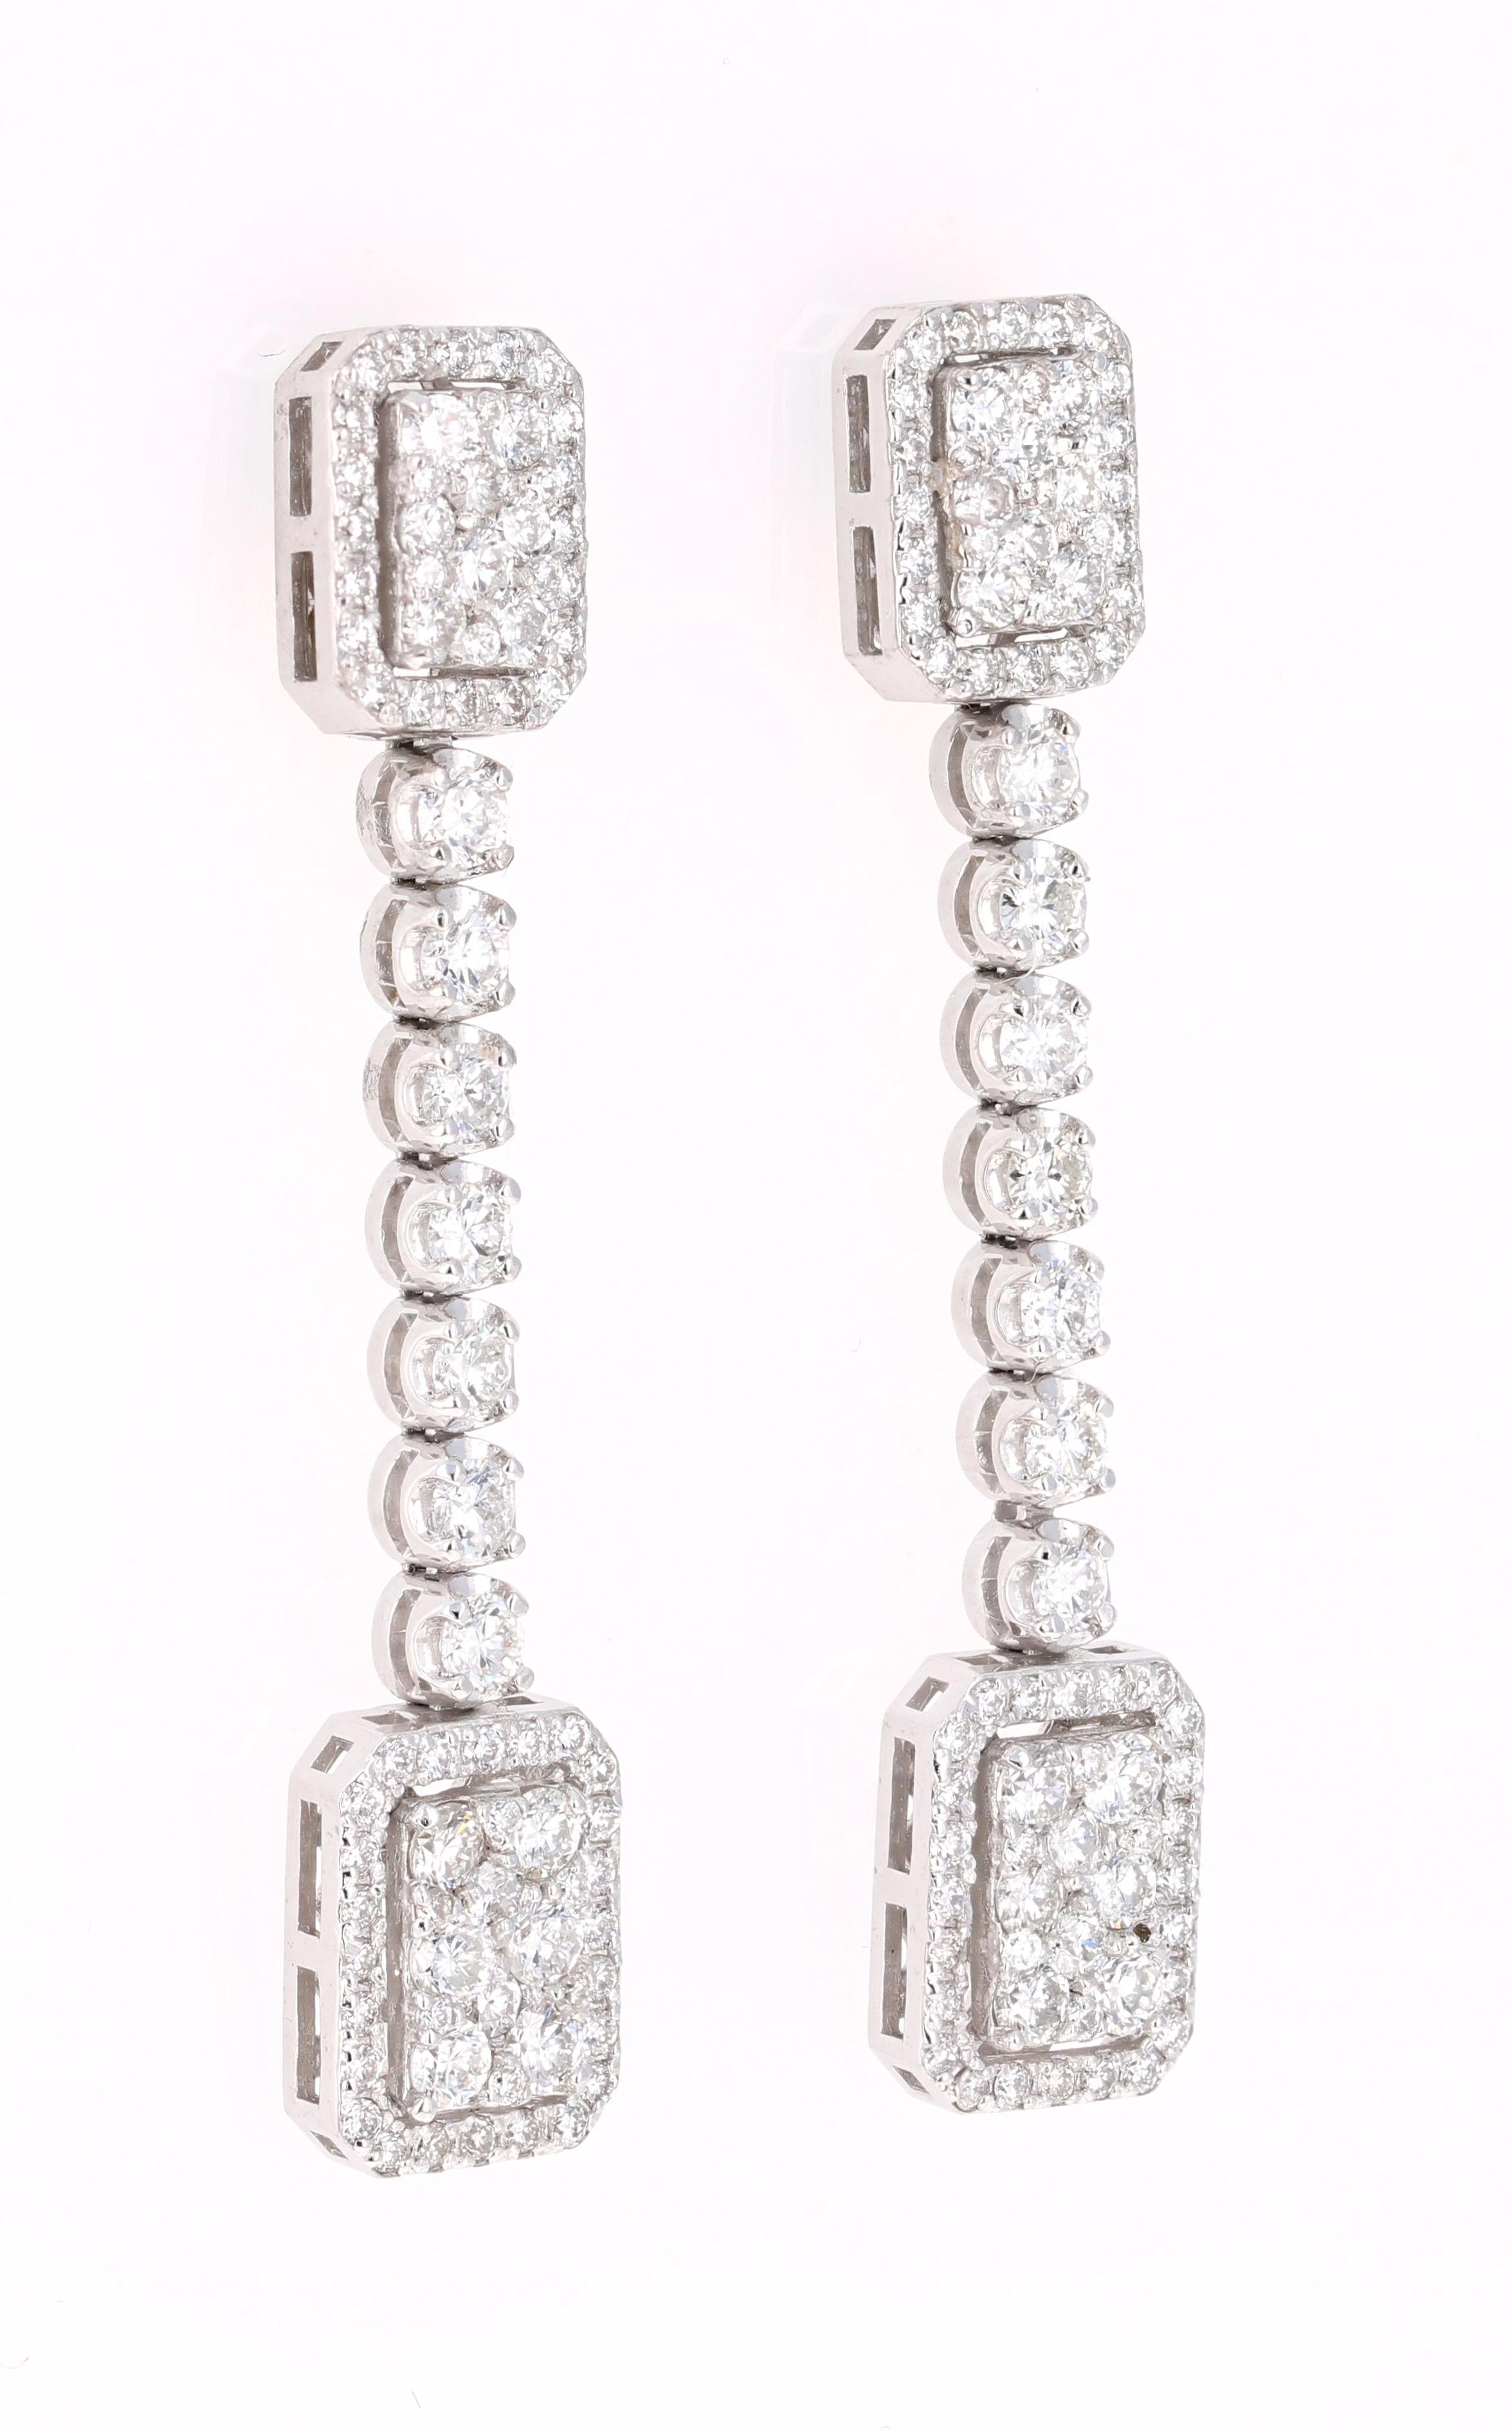 2.44 Carat Diamond Dangling 14 Karat White Gold Earrings

These delicate, yet intricate design earrings are sure to make a stunning statement!  There are 158 Round Cut Diamonds that weigh 2.44 Carats (Clarity: SI1/Color: F).  

Made in 14K White